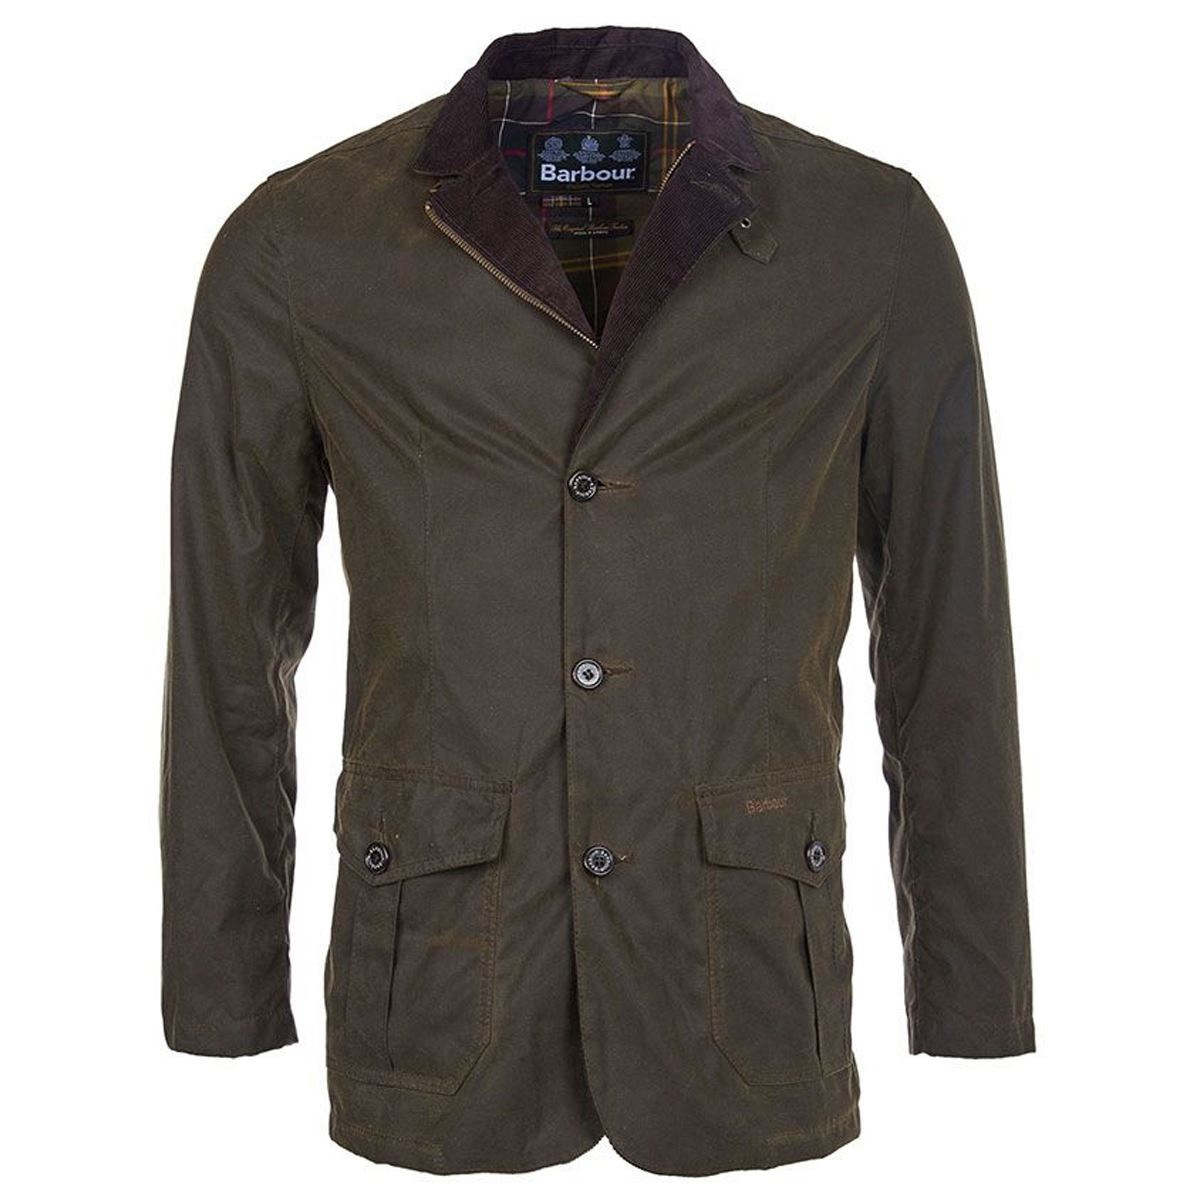 What sizes and colors does the Barbour Lutz jacket come in?